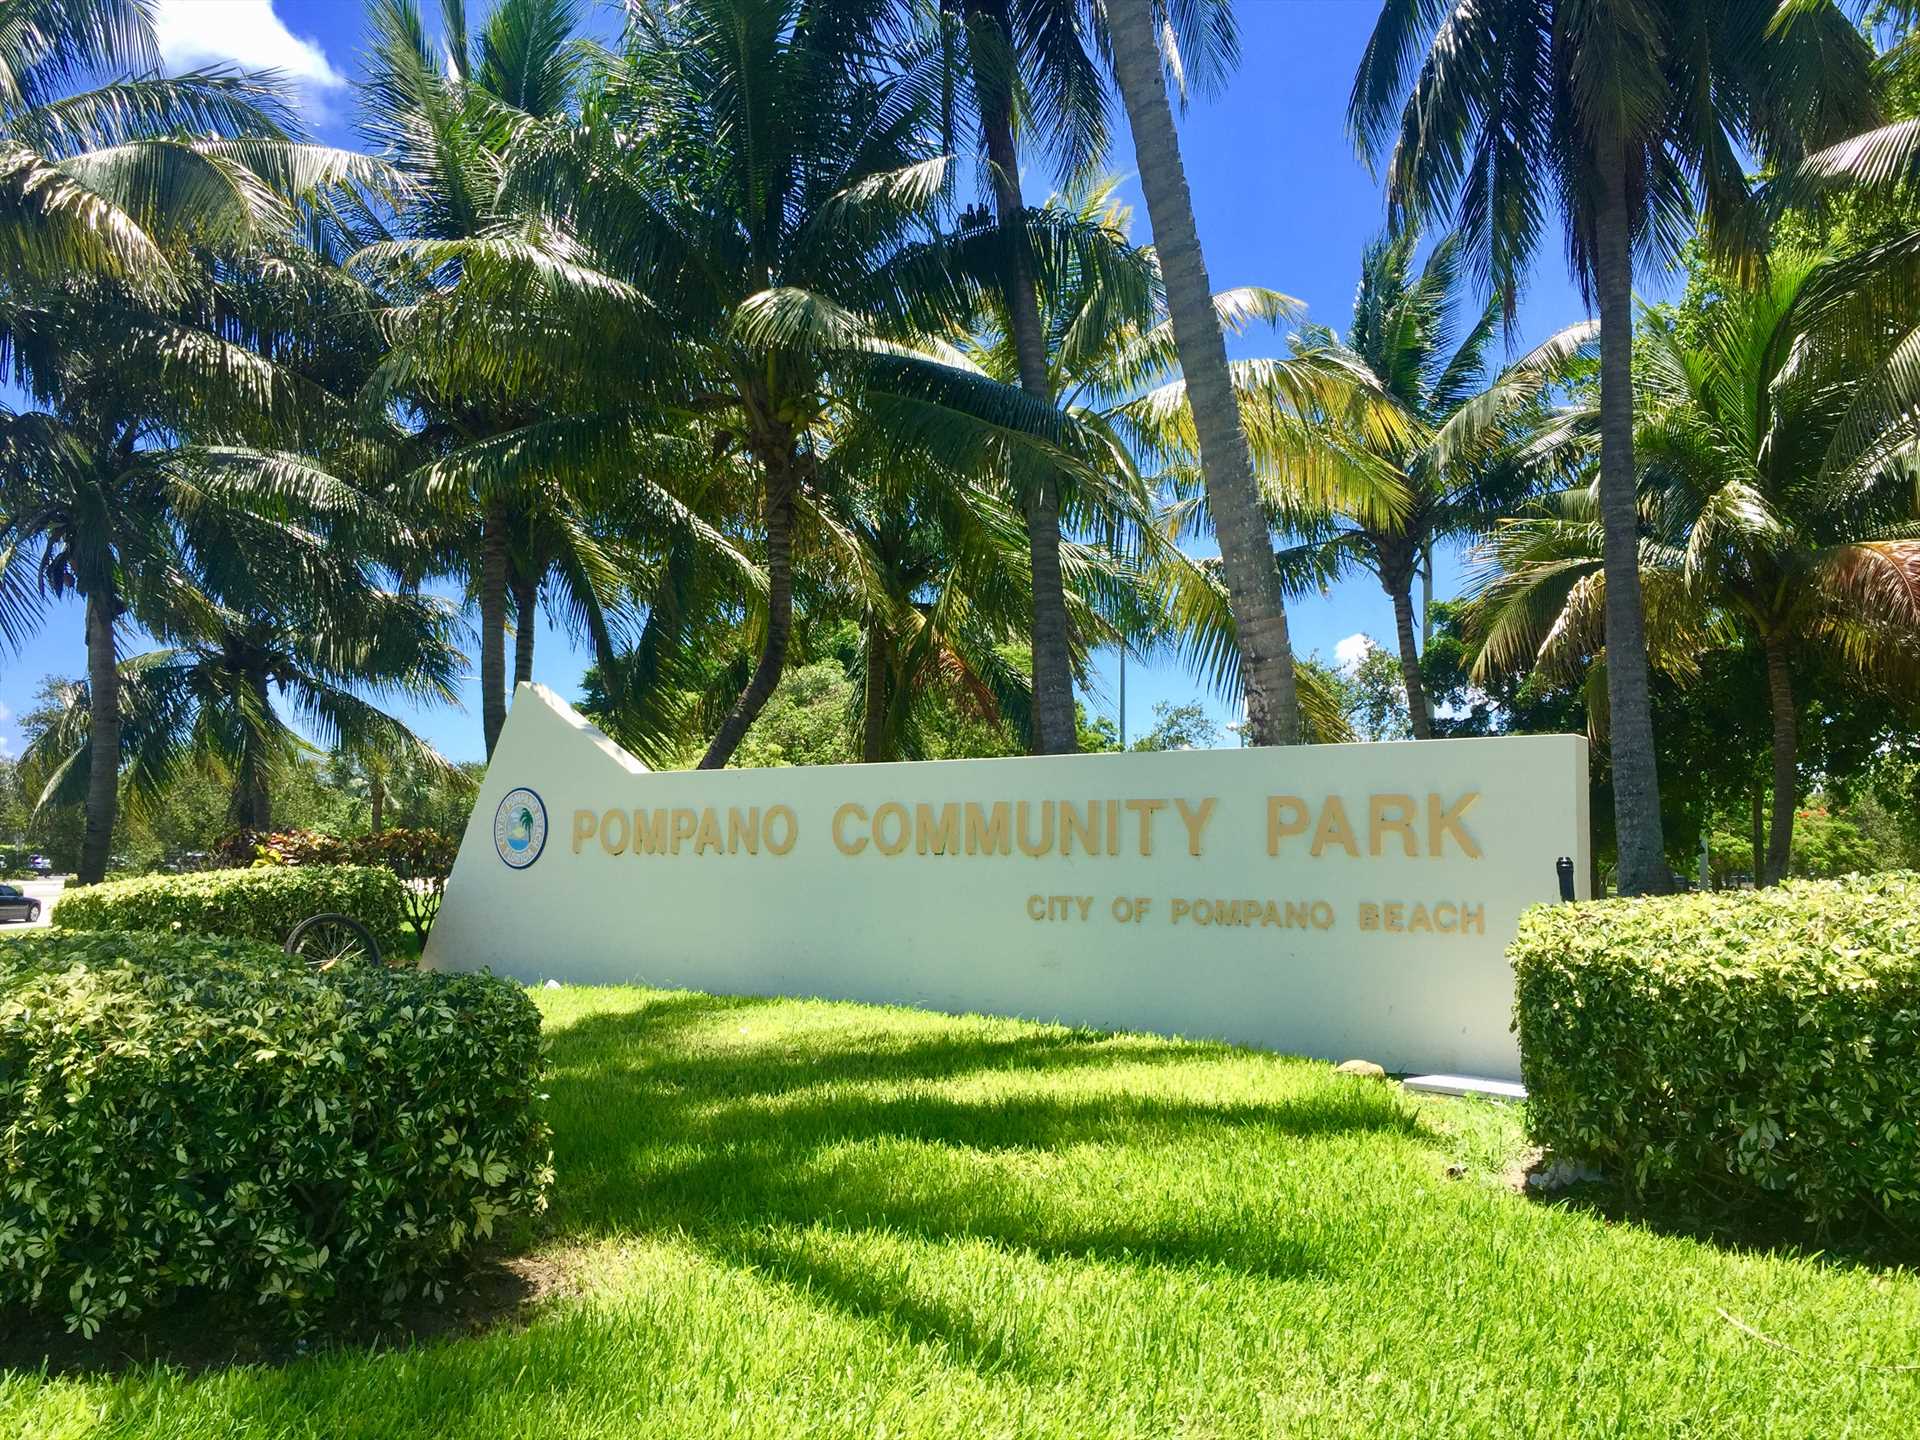 Pompano Community Park features basketball, volley ball and 